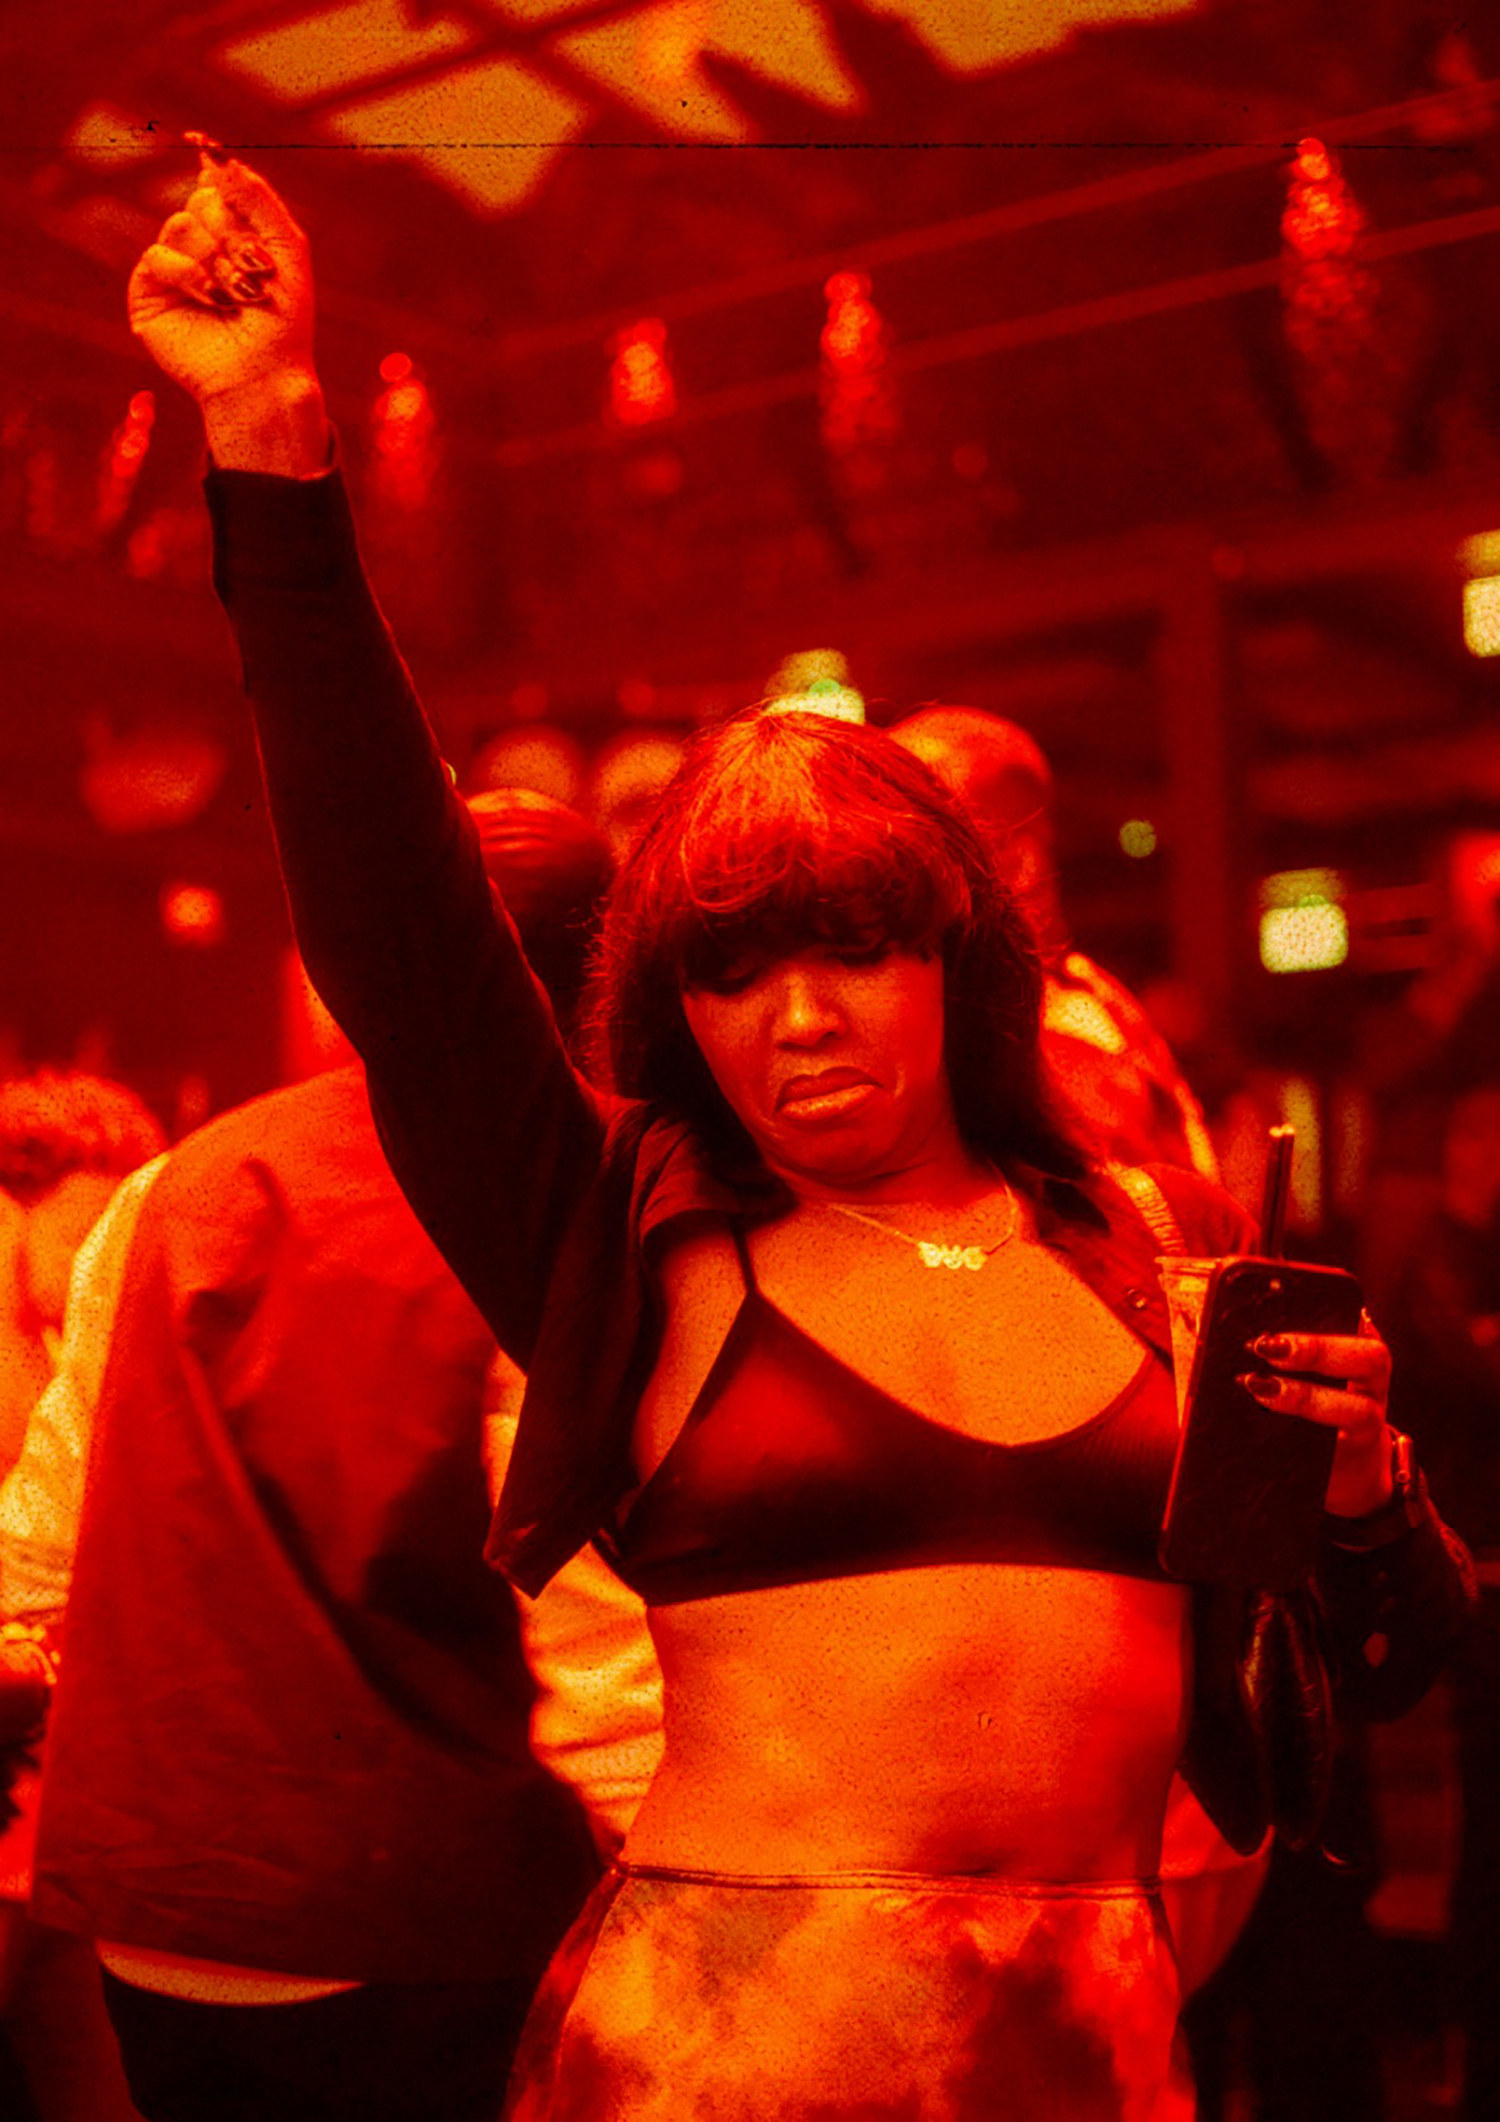 A Black woman dances in a club while holding her drink and a mobile phone.